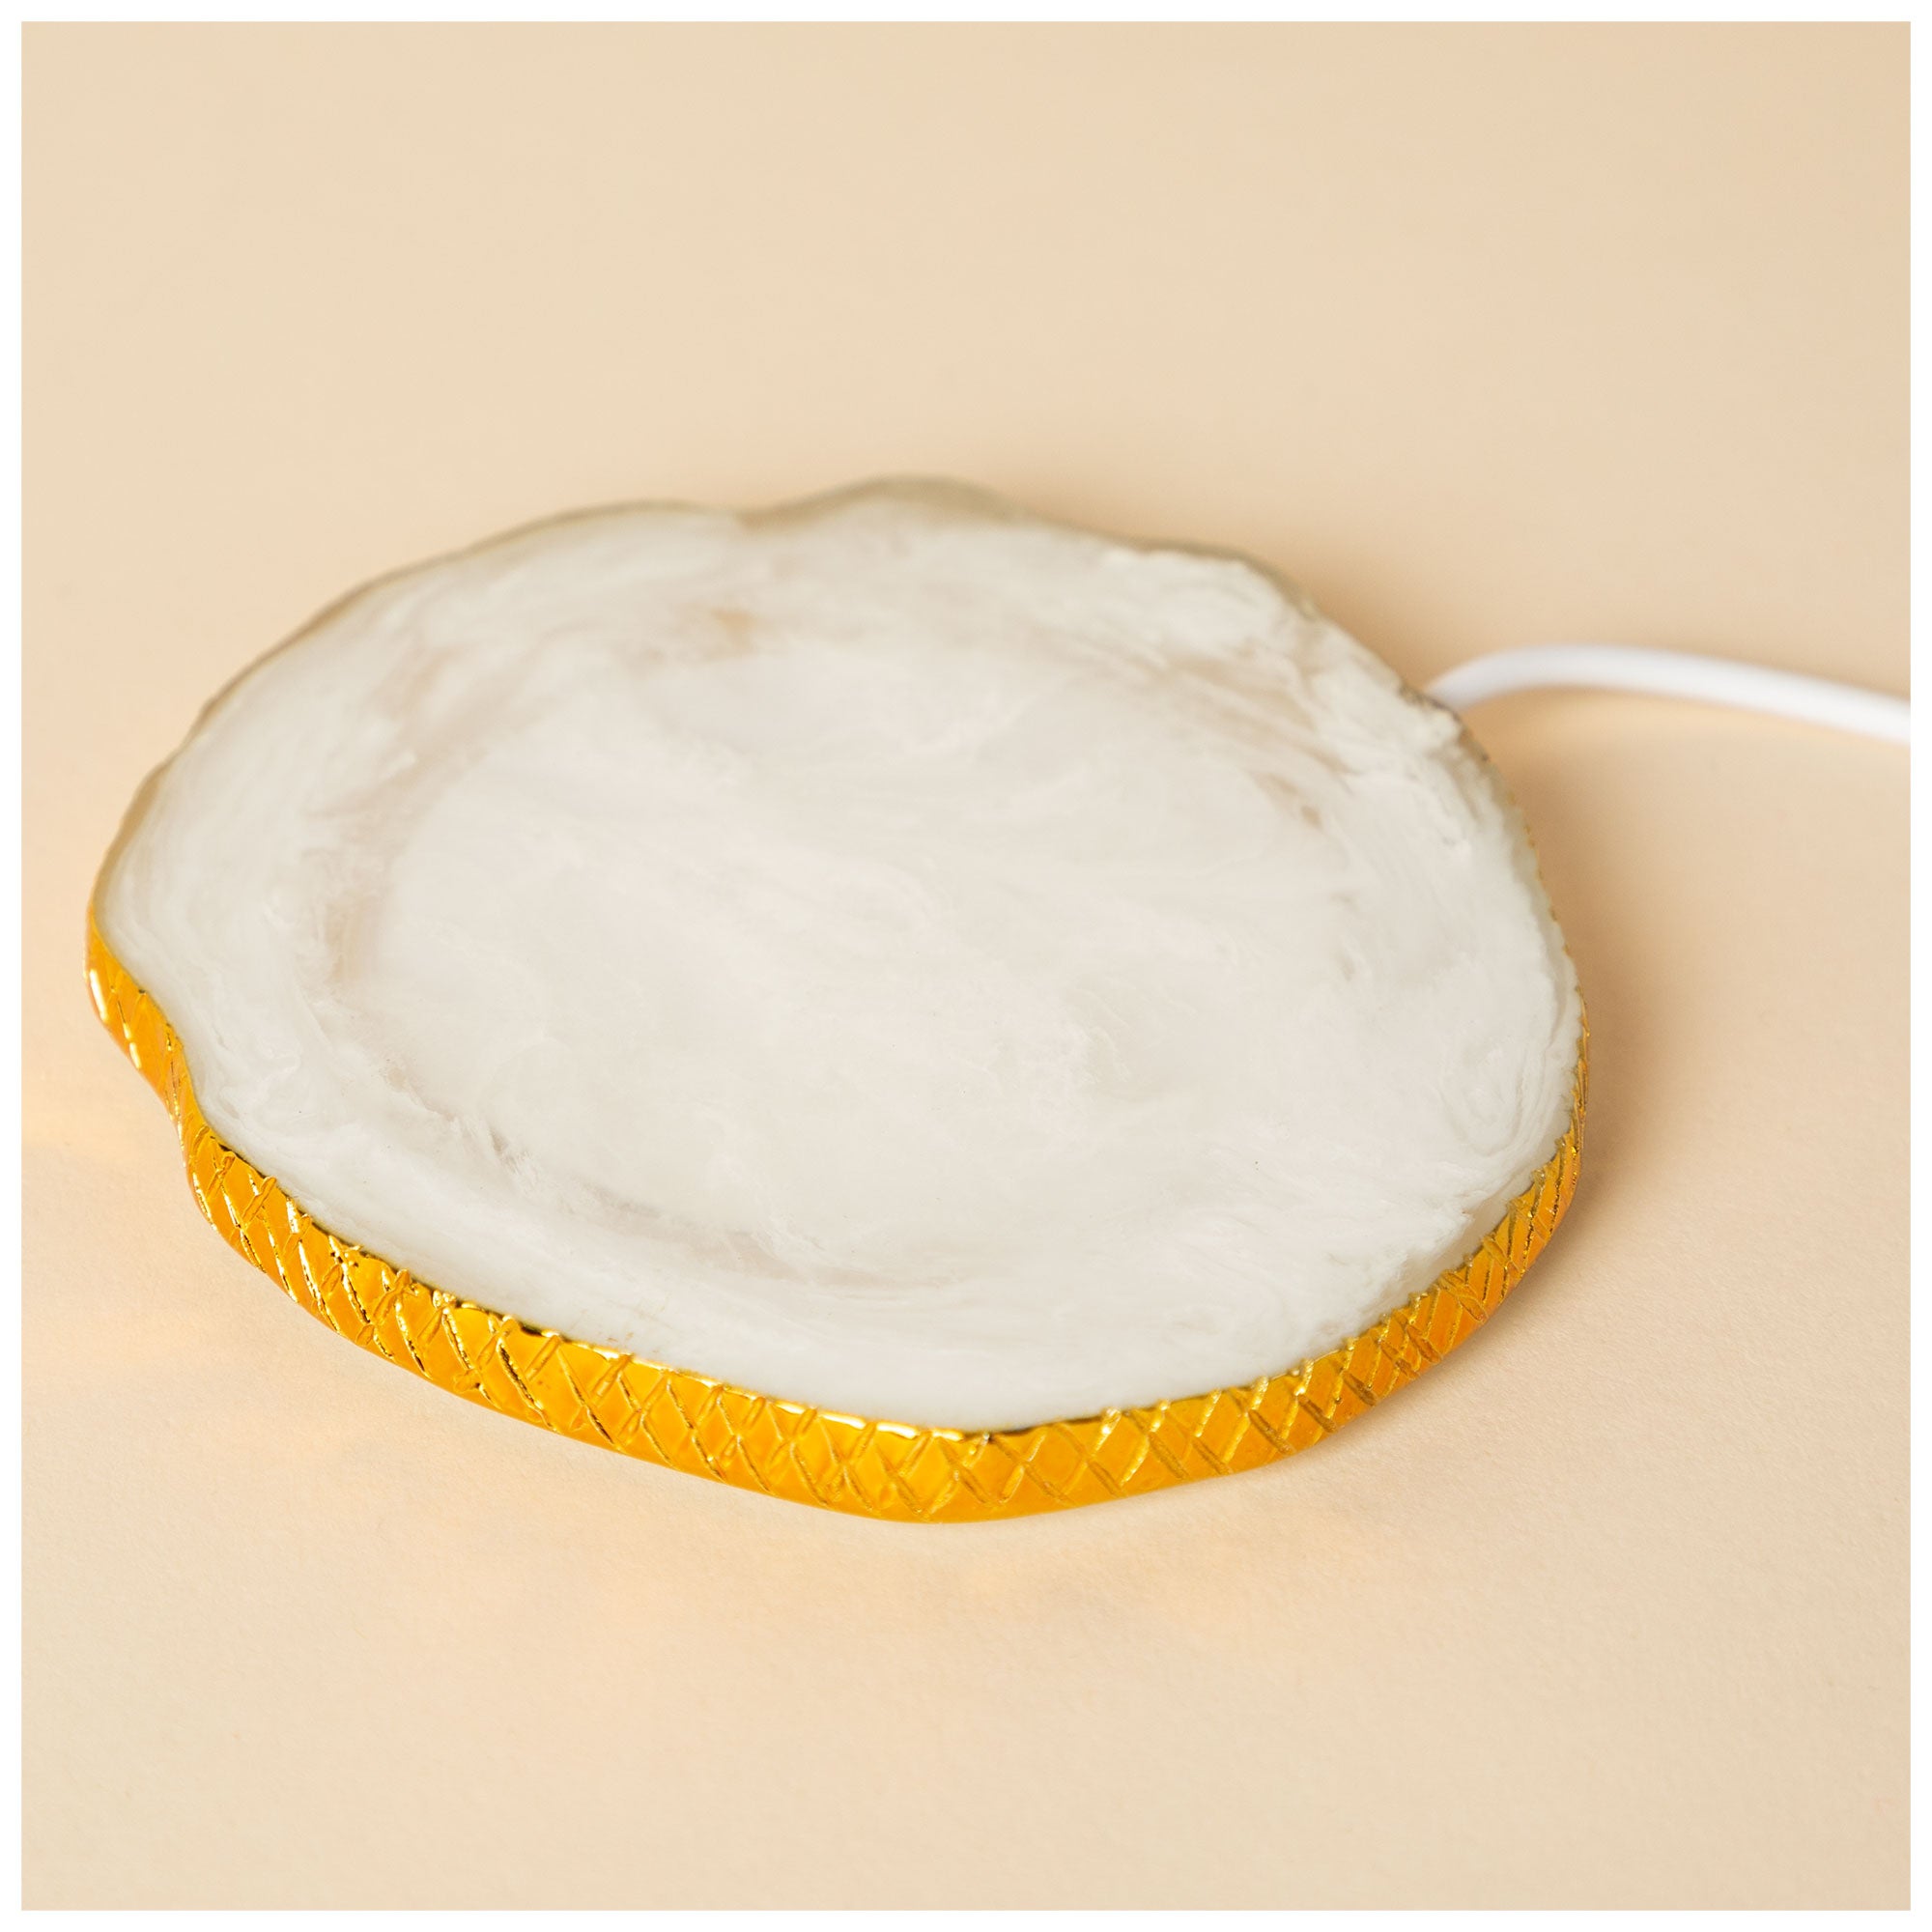 Wireless Charging Agate Crystal Pad - White